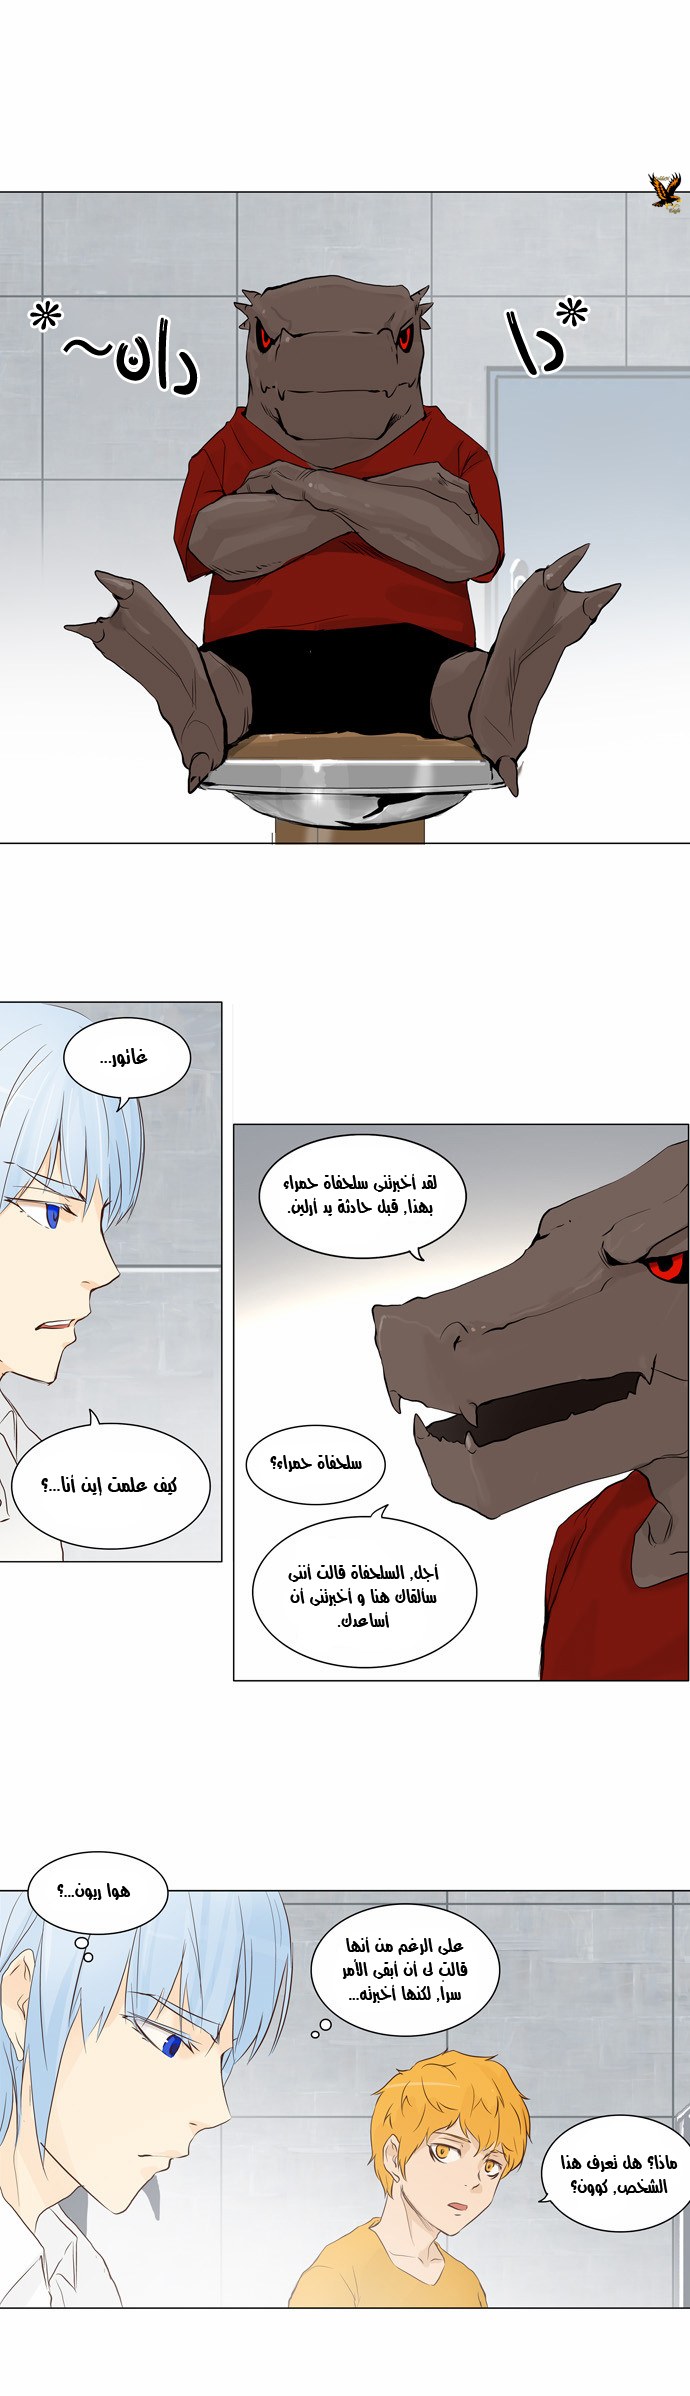 Tower of God 2: Chapter 67 - Page 1